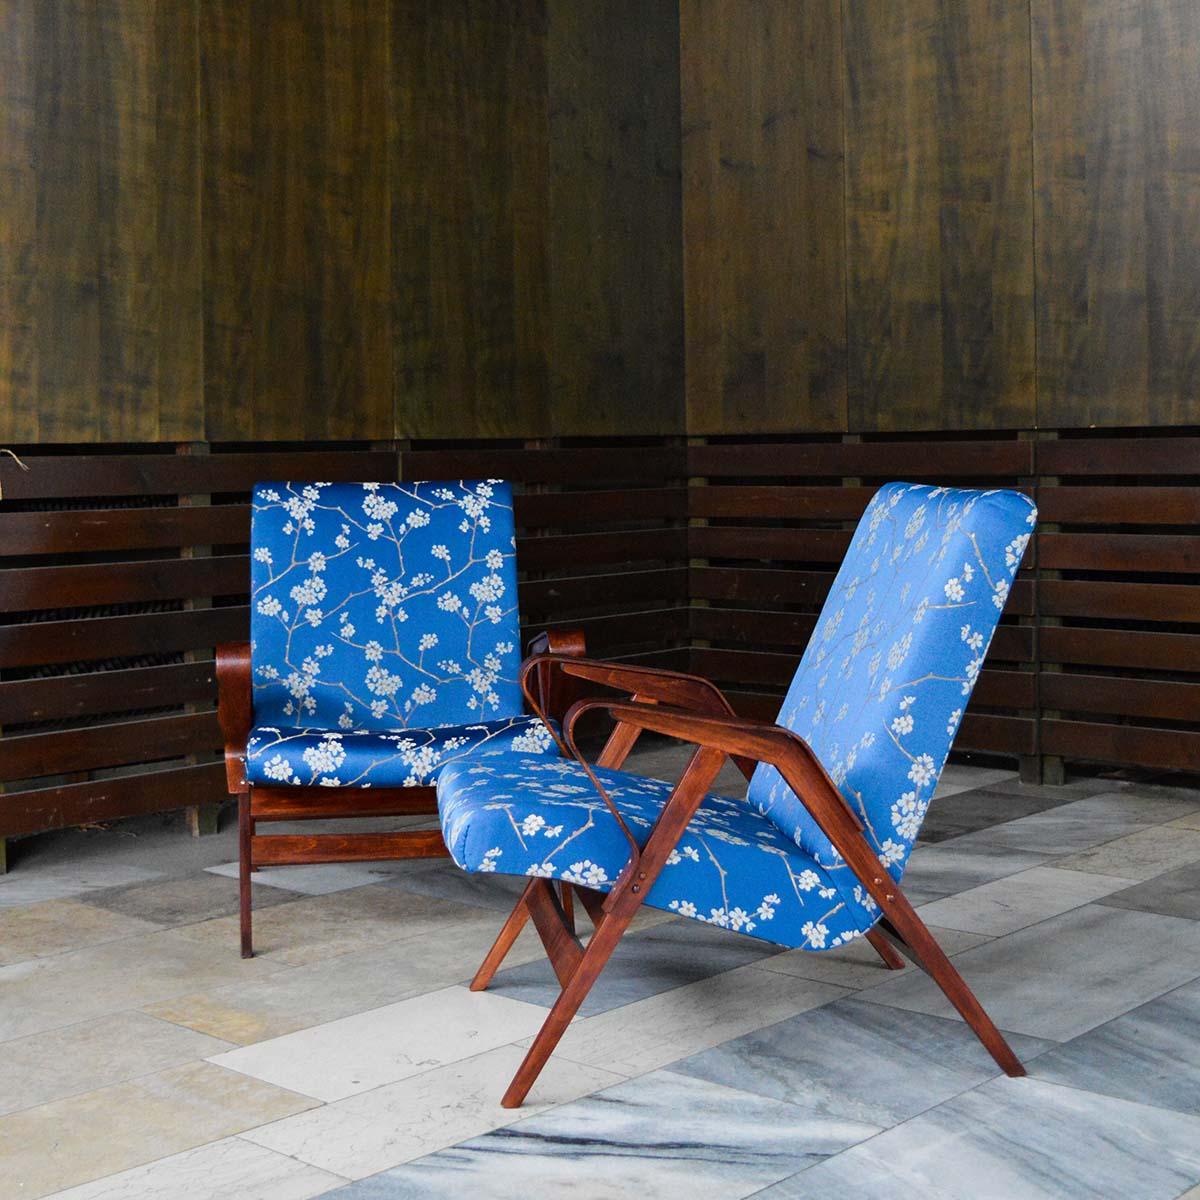 Pair of Mid-Century plywood lounge chairs, model No. 24-23, designed by František Jirák for Tatra Nábytok in Czechoslovakia, 1960s.

These lounge chairs features a very elegant design, which followed the huge success of the Czechoslovak pavilion